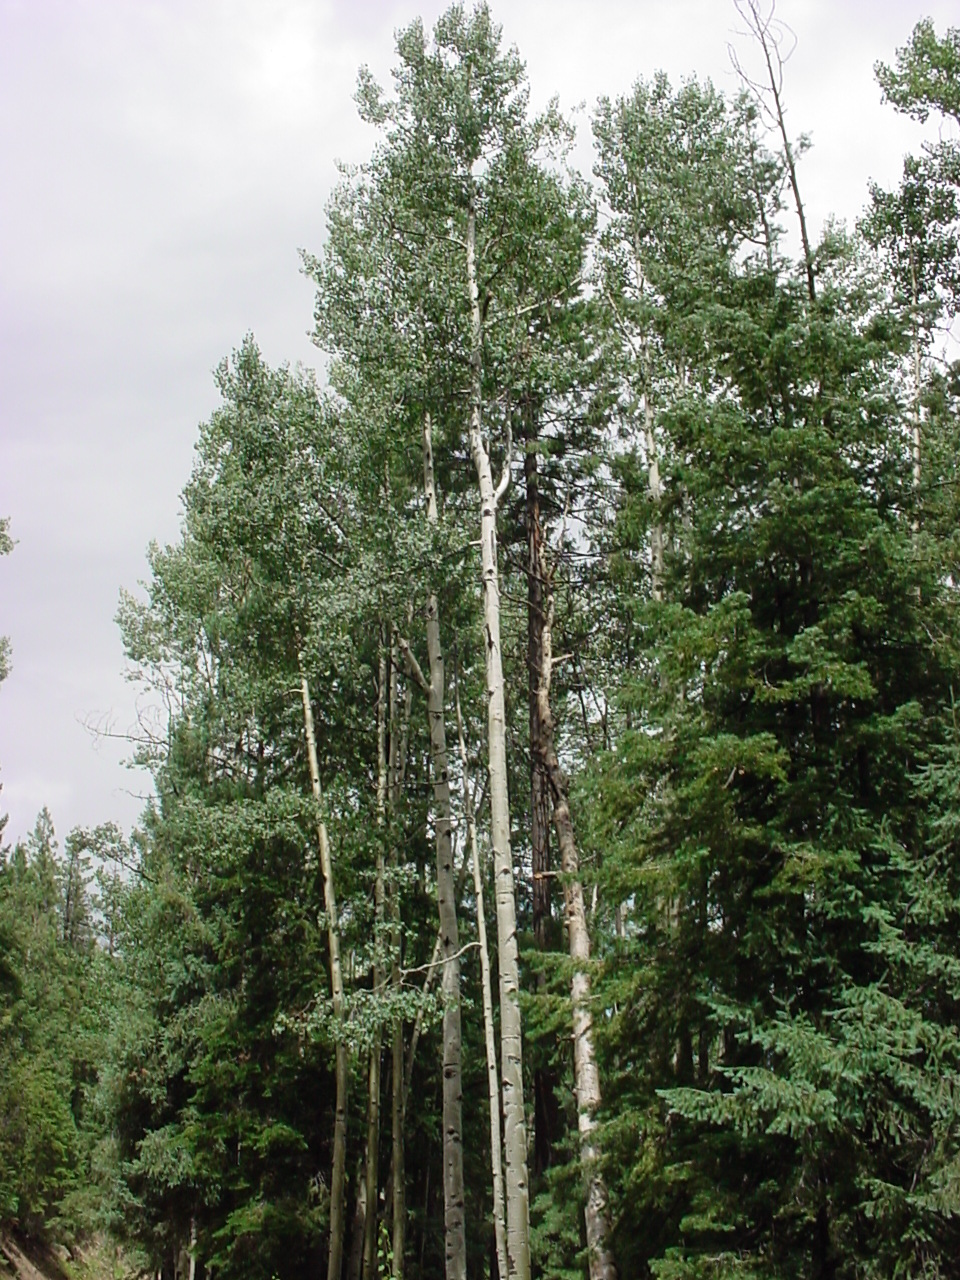 Growth habit showing tall trunks and denser foliage near the top of the tree